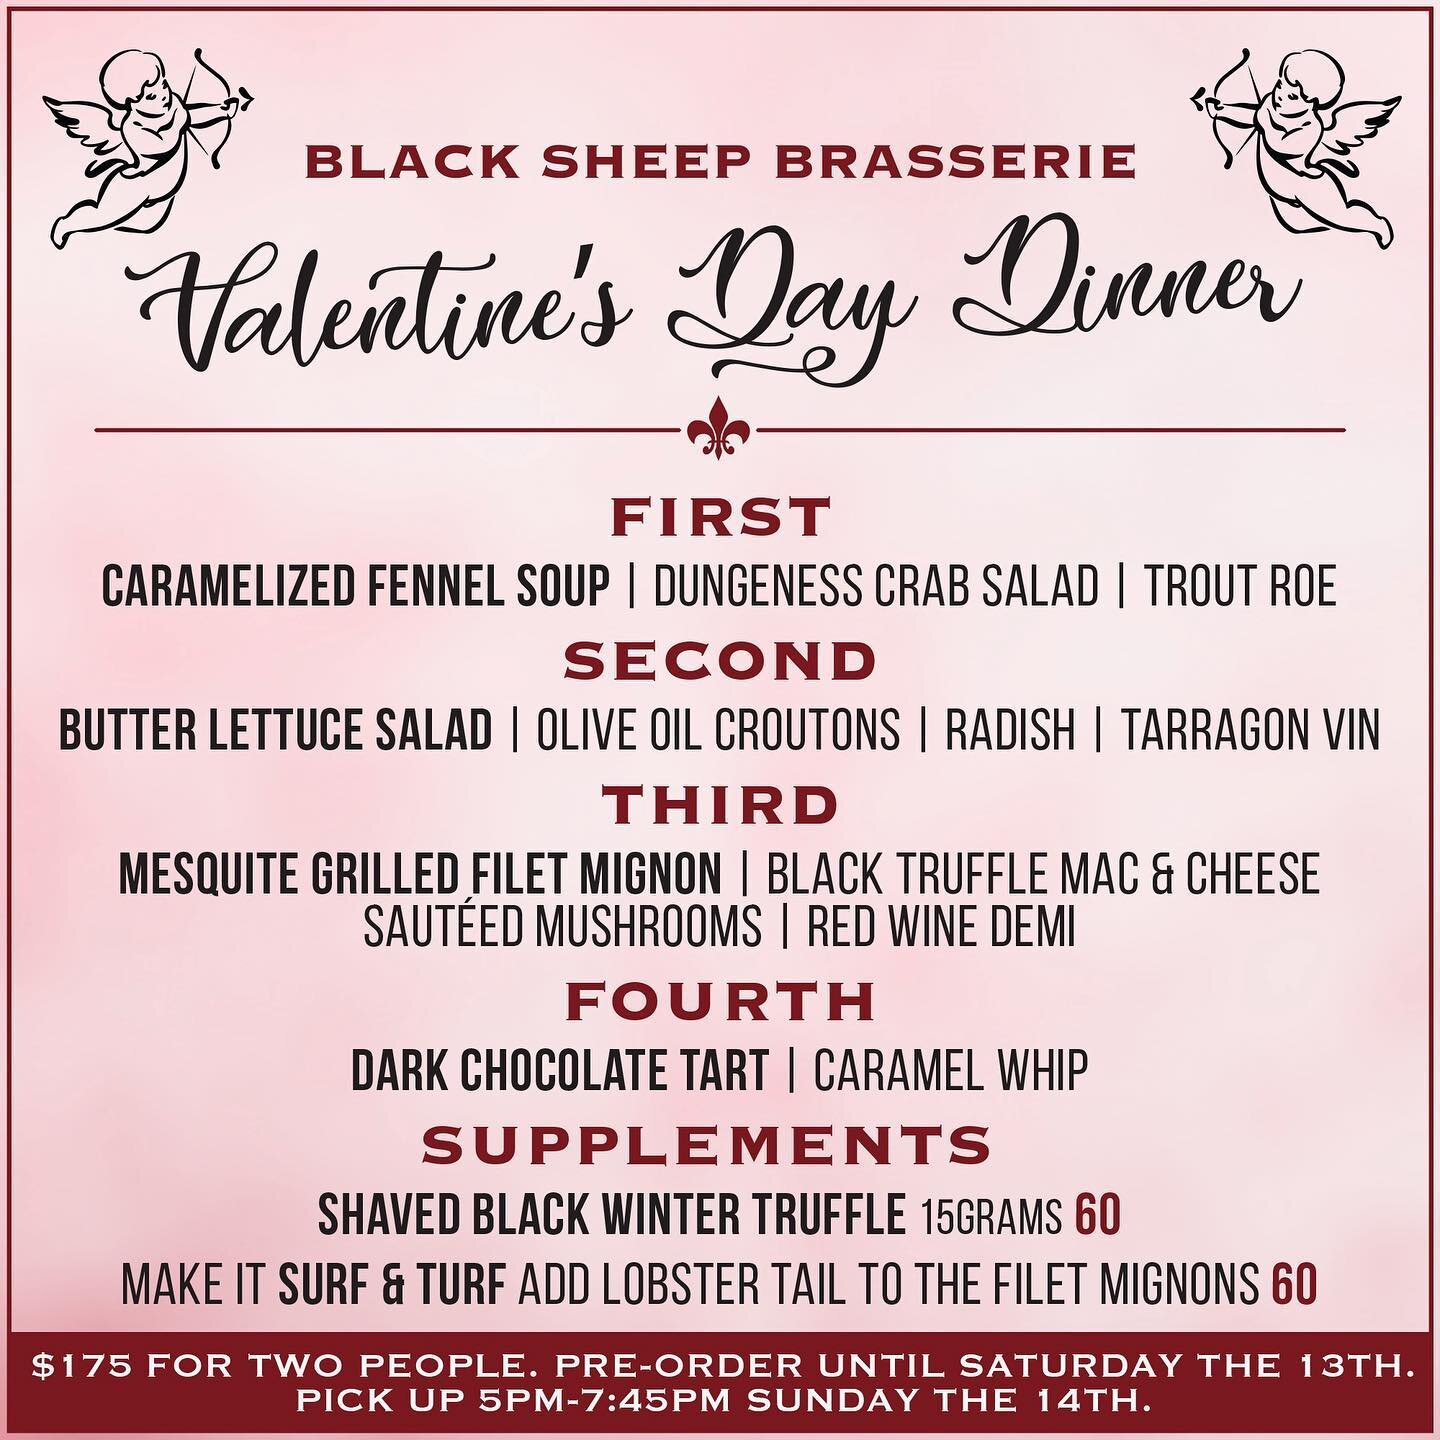 Our Valentine&rsquo;s Day Meal @ Home for 2 is available for preorder! 

Order online through the &ldquo;Reserve&rdquo; link in our profile. 

Please note, preorder cutoff is Saturday evening so place your order beforehand. 

We will NOT be offering 